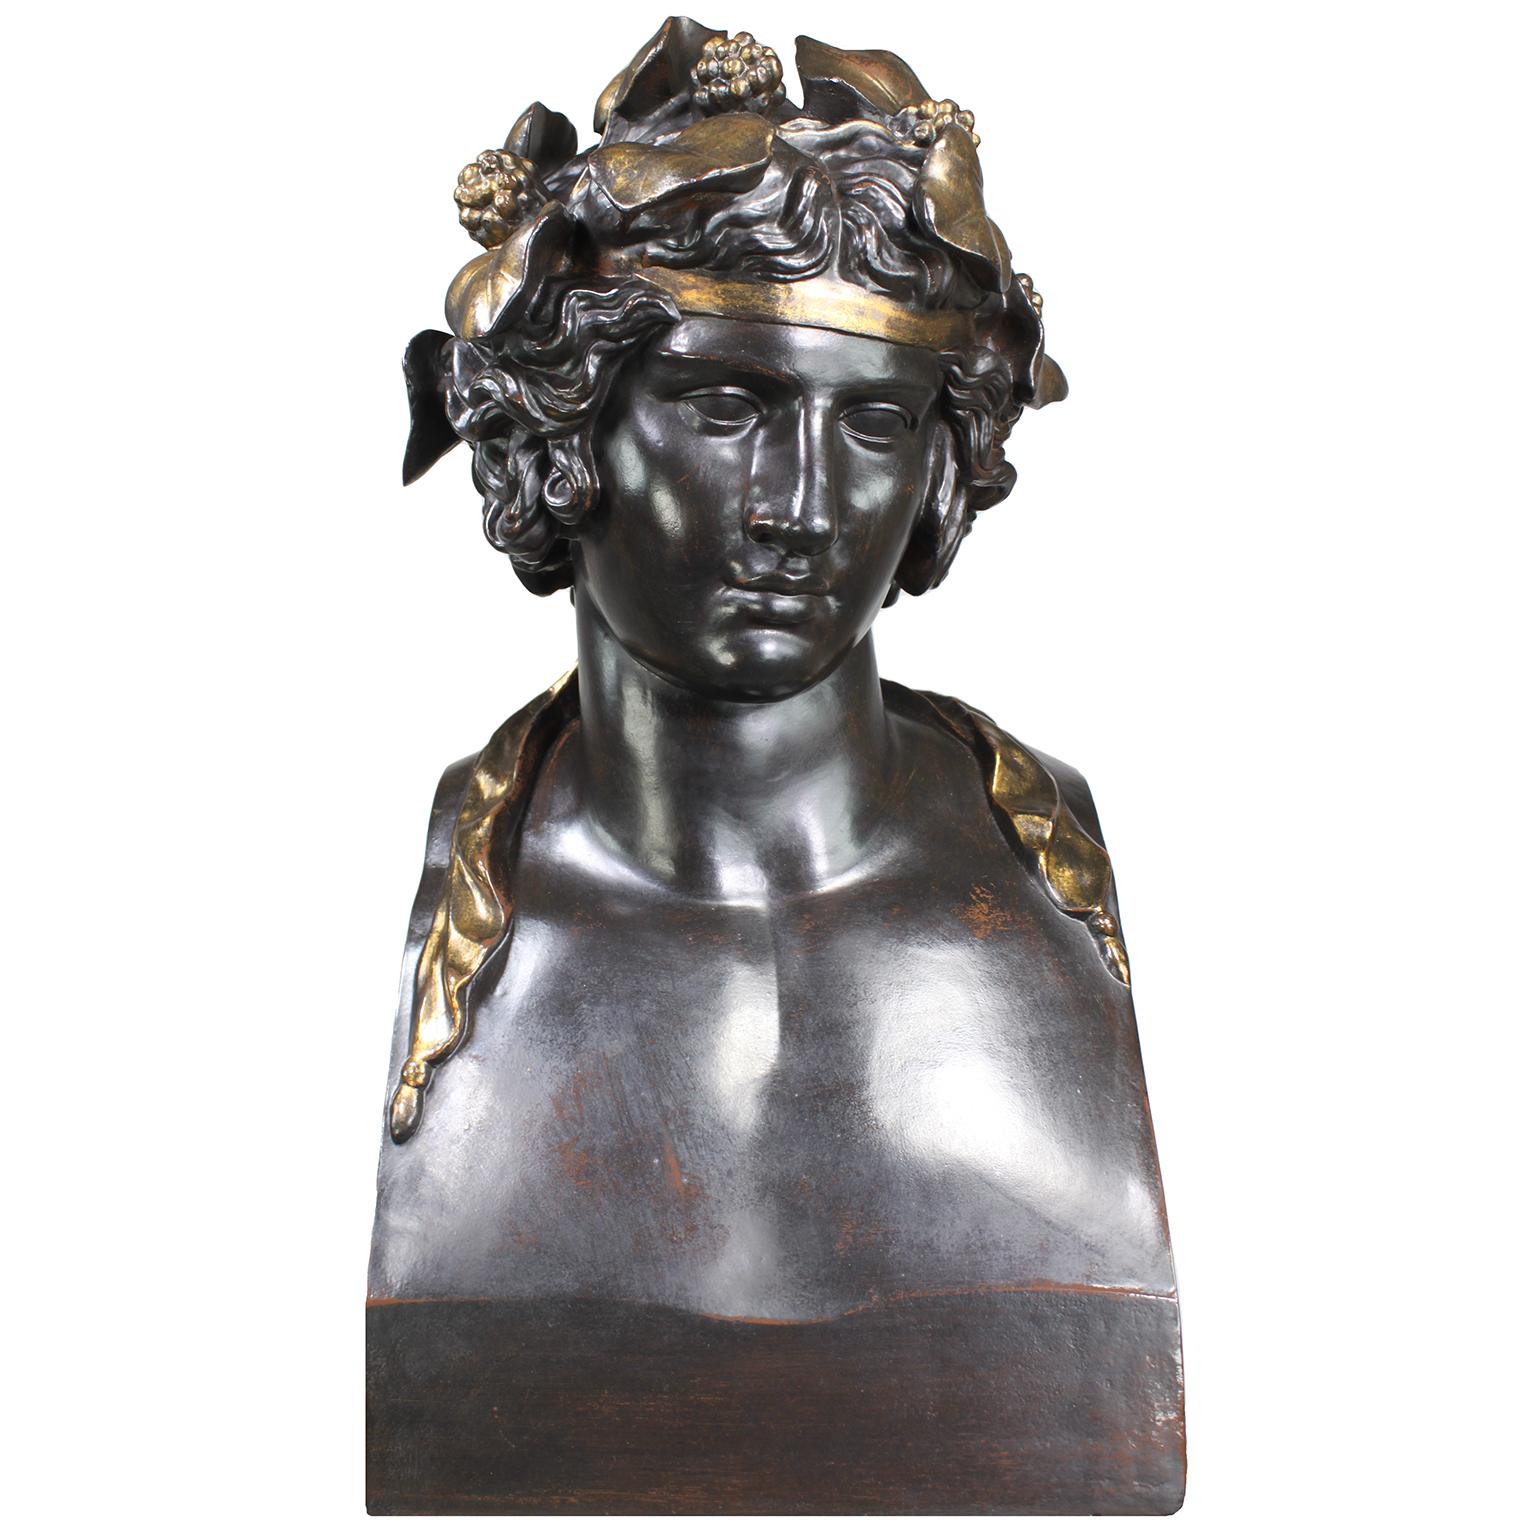 A Monumental French 19th Century Patinated and Parcel Gilt Cast-Iron Bust of 'Head from a Statue of Antinous as Dionysus' Wearing a Wreath of Ivy - Roman Bacchus, God of the Wine, after the Greek models of the mid-4th century BC. Bust. This